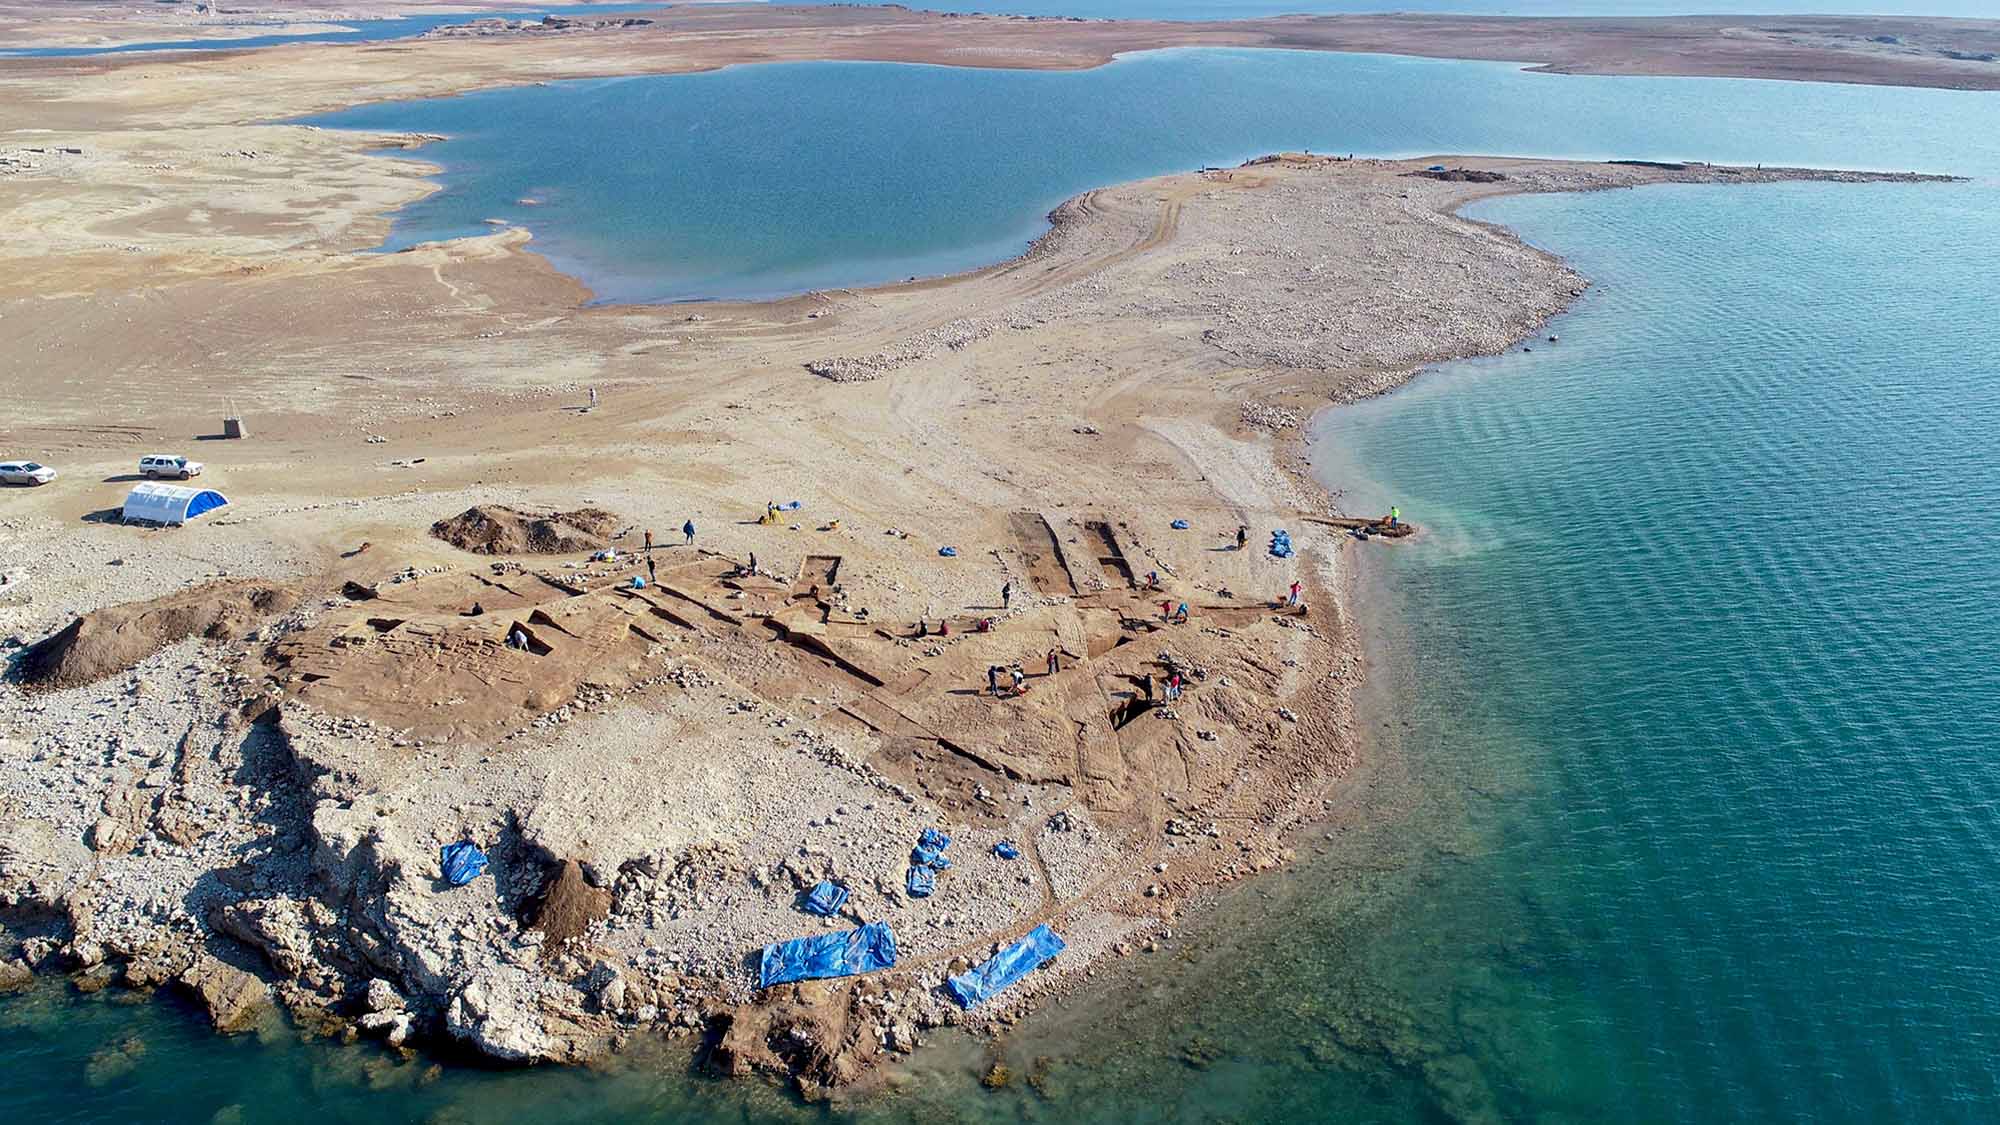 Read more about the article Archaeologists Scramble To Investigate 3,400-Year-Old City Emerging From Tigris River In Iraq Before It Is Submerged Again